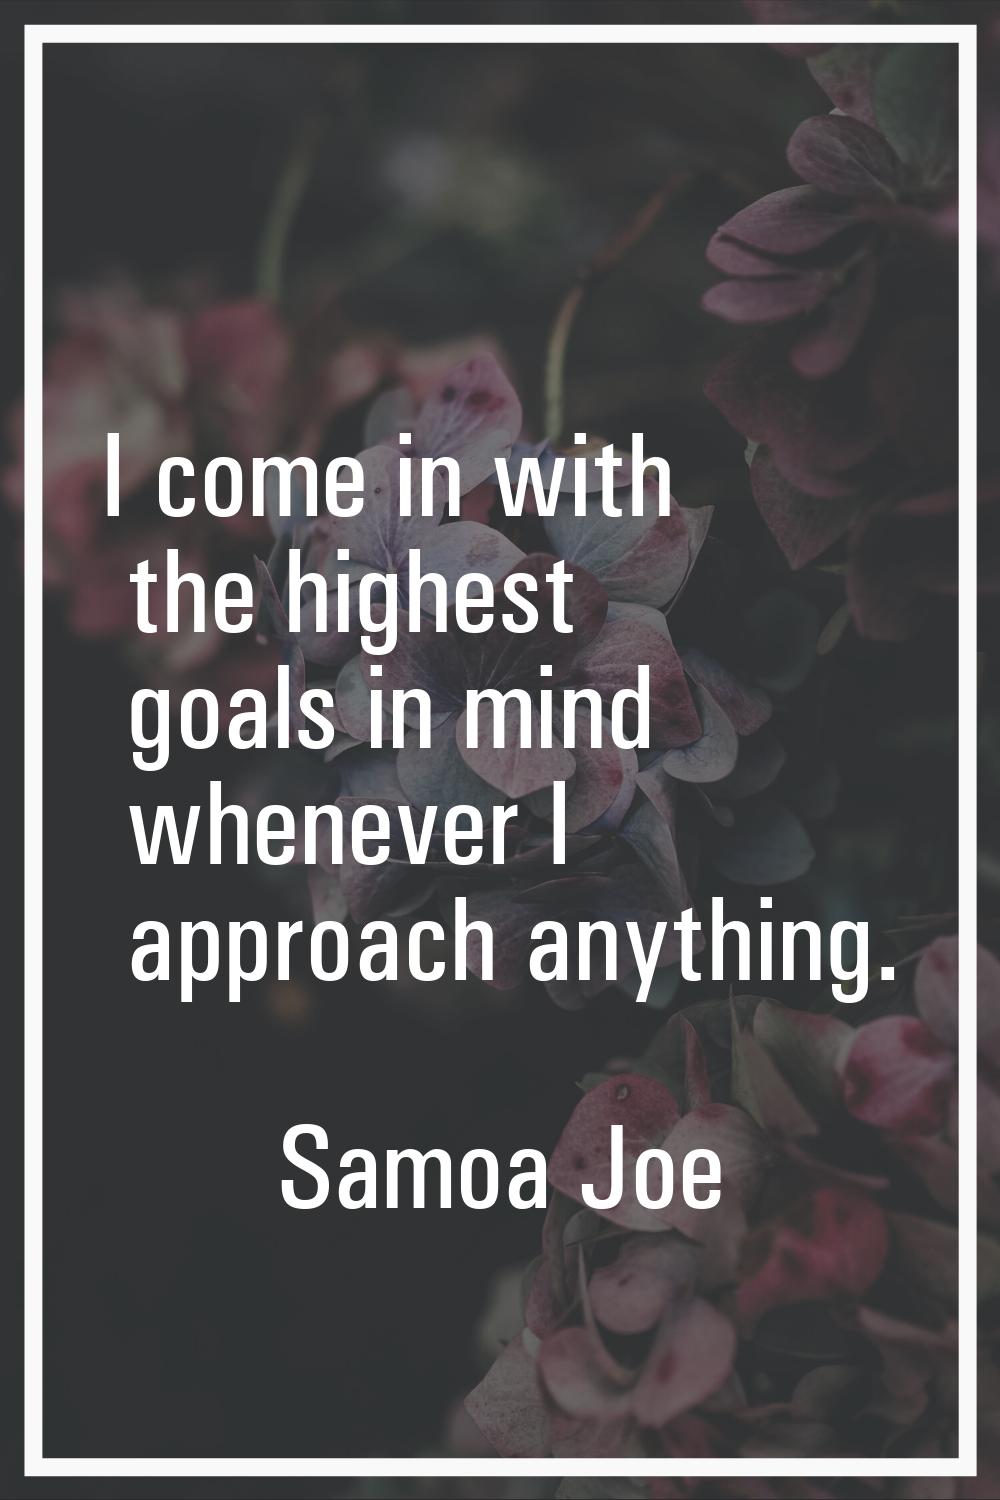 I come in with the highest goals in mind whenever I approach anything.